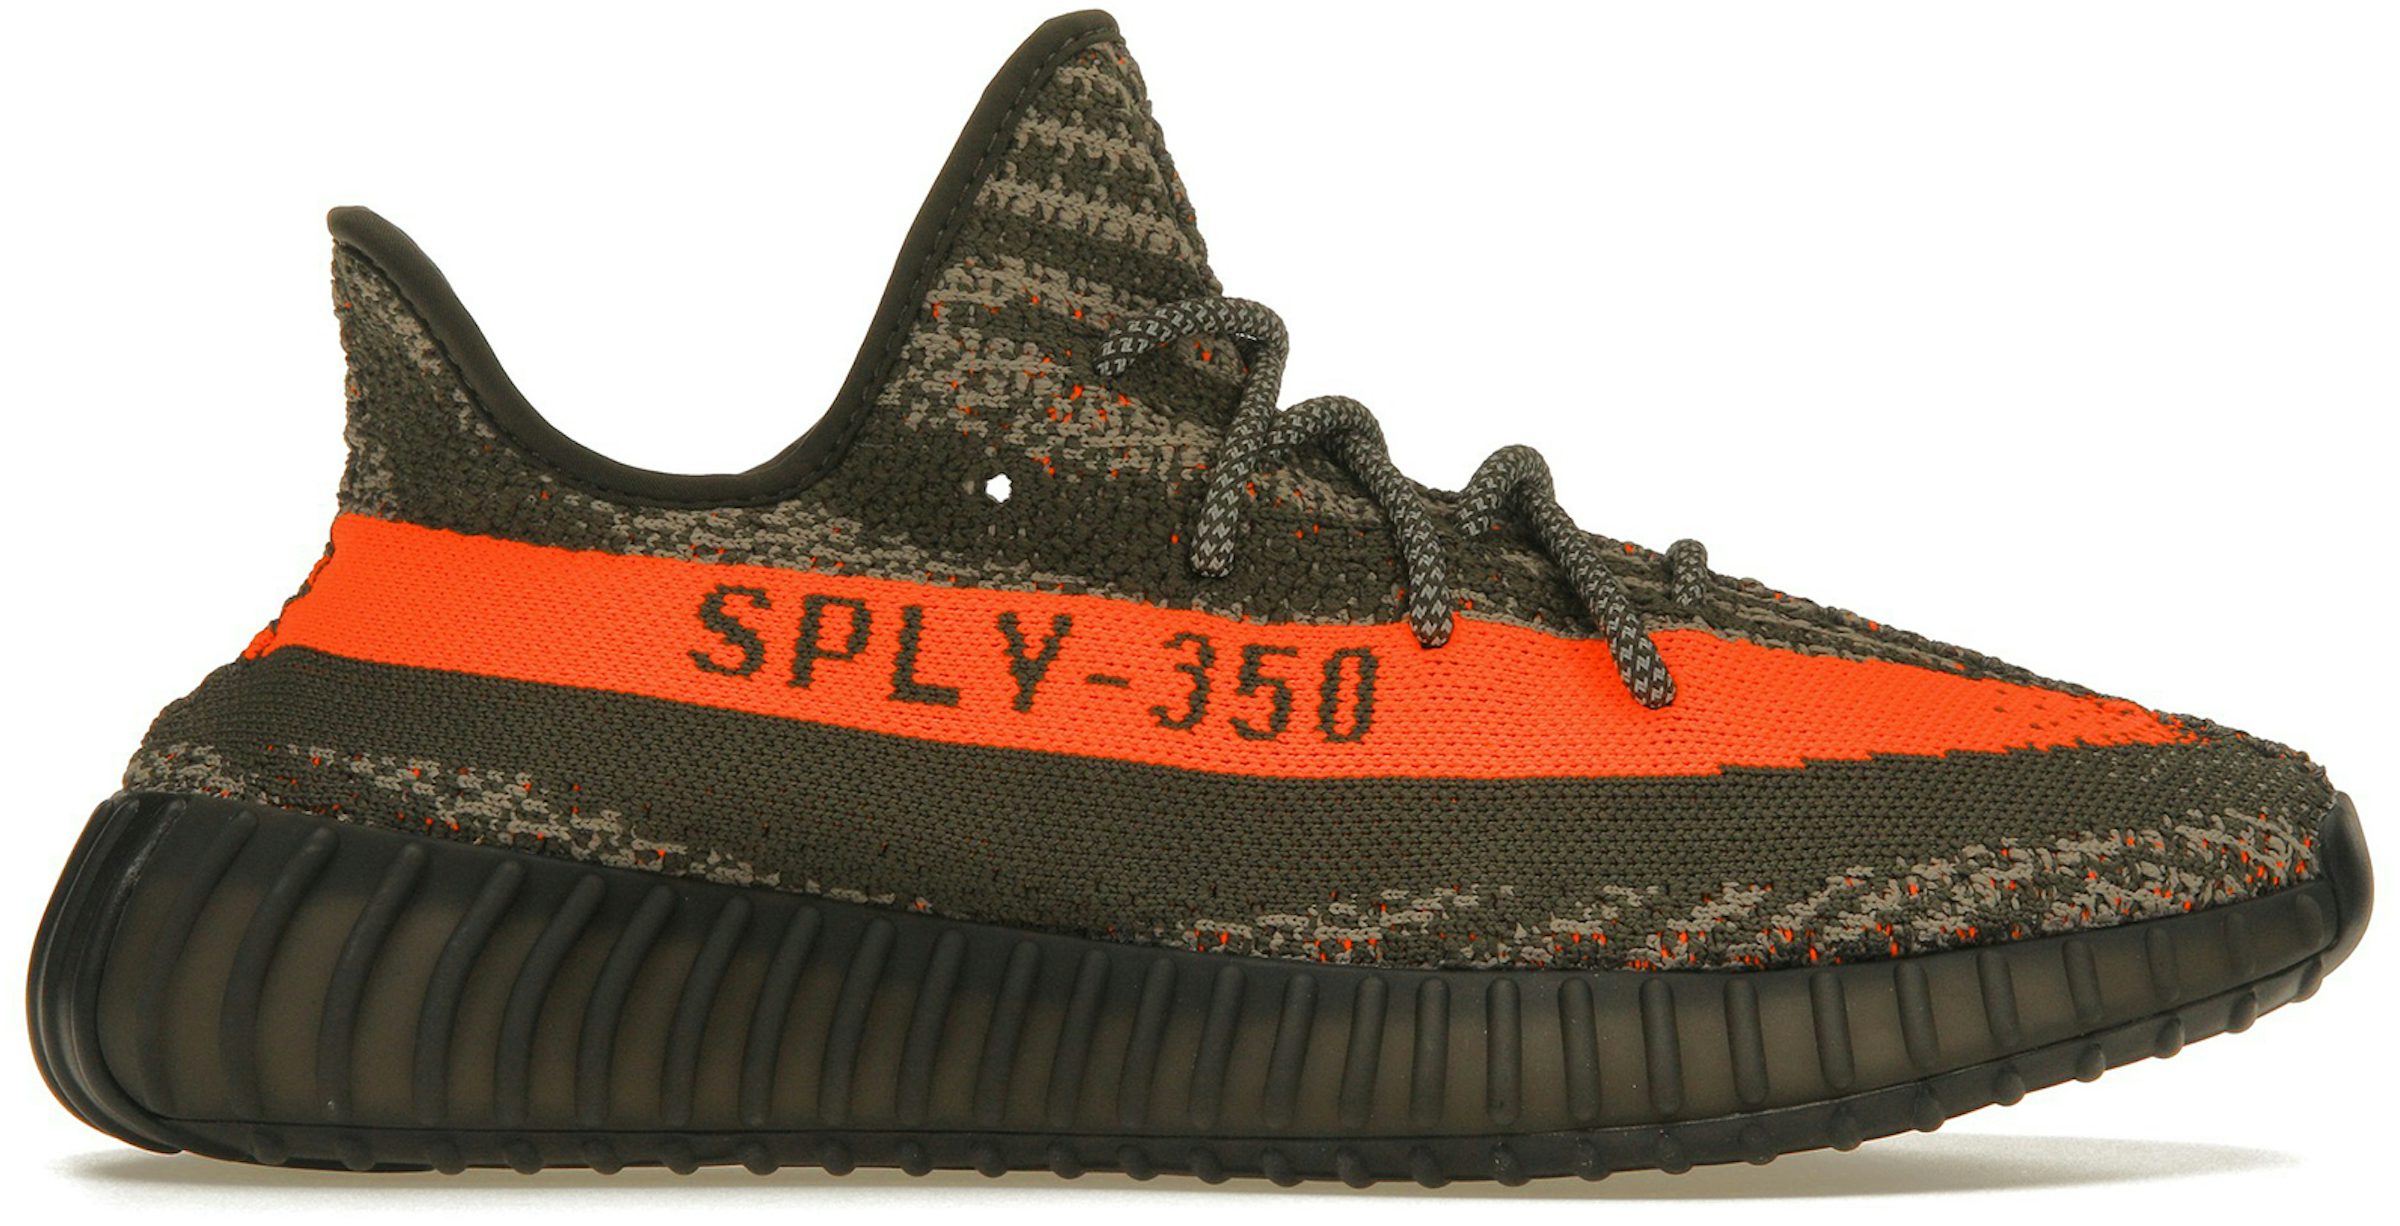 revidere Furnace administration Buy Yeezy v2 Shoes & New Sneakers - StockX